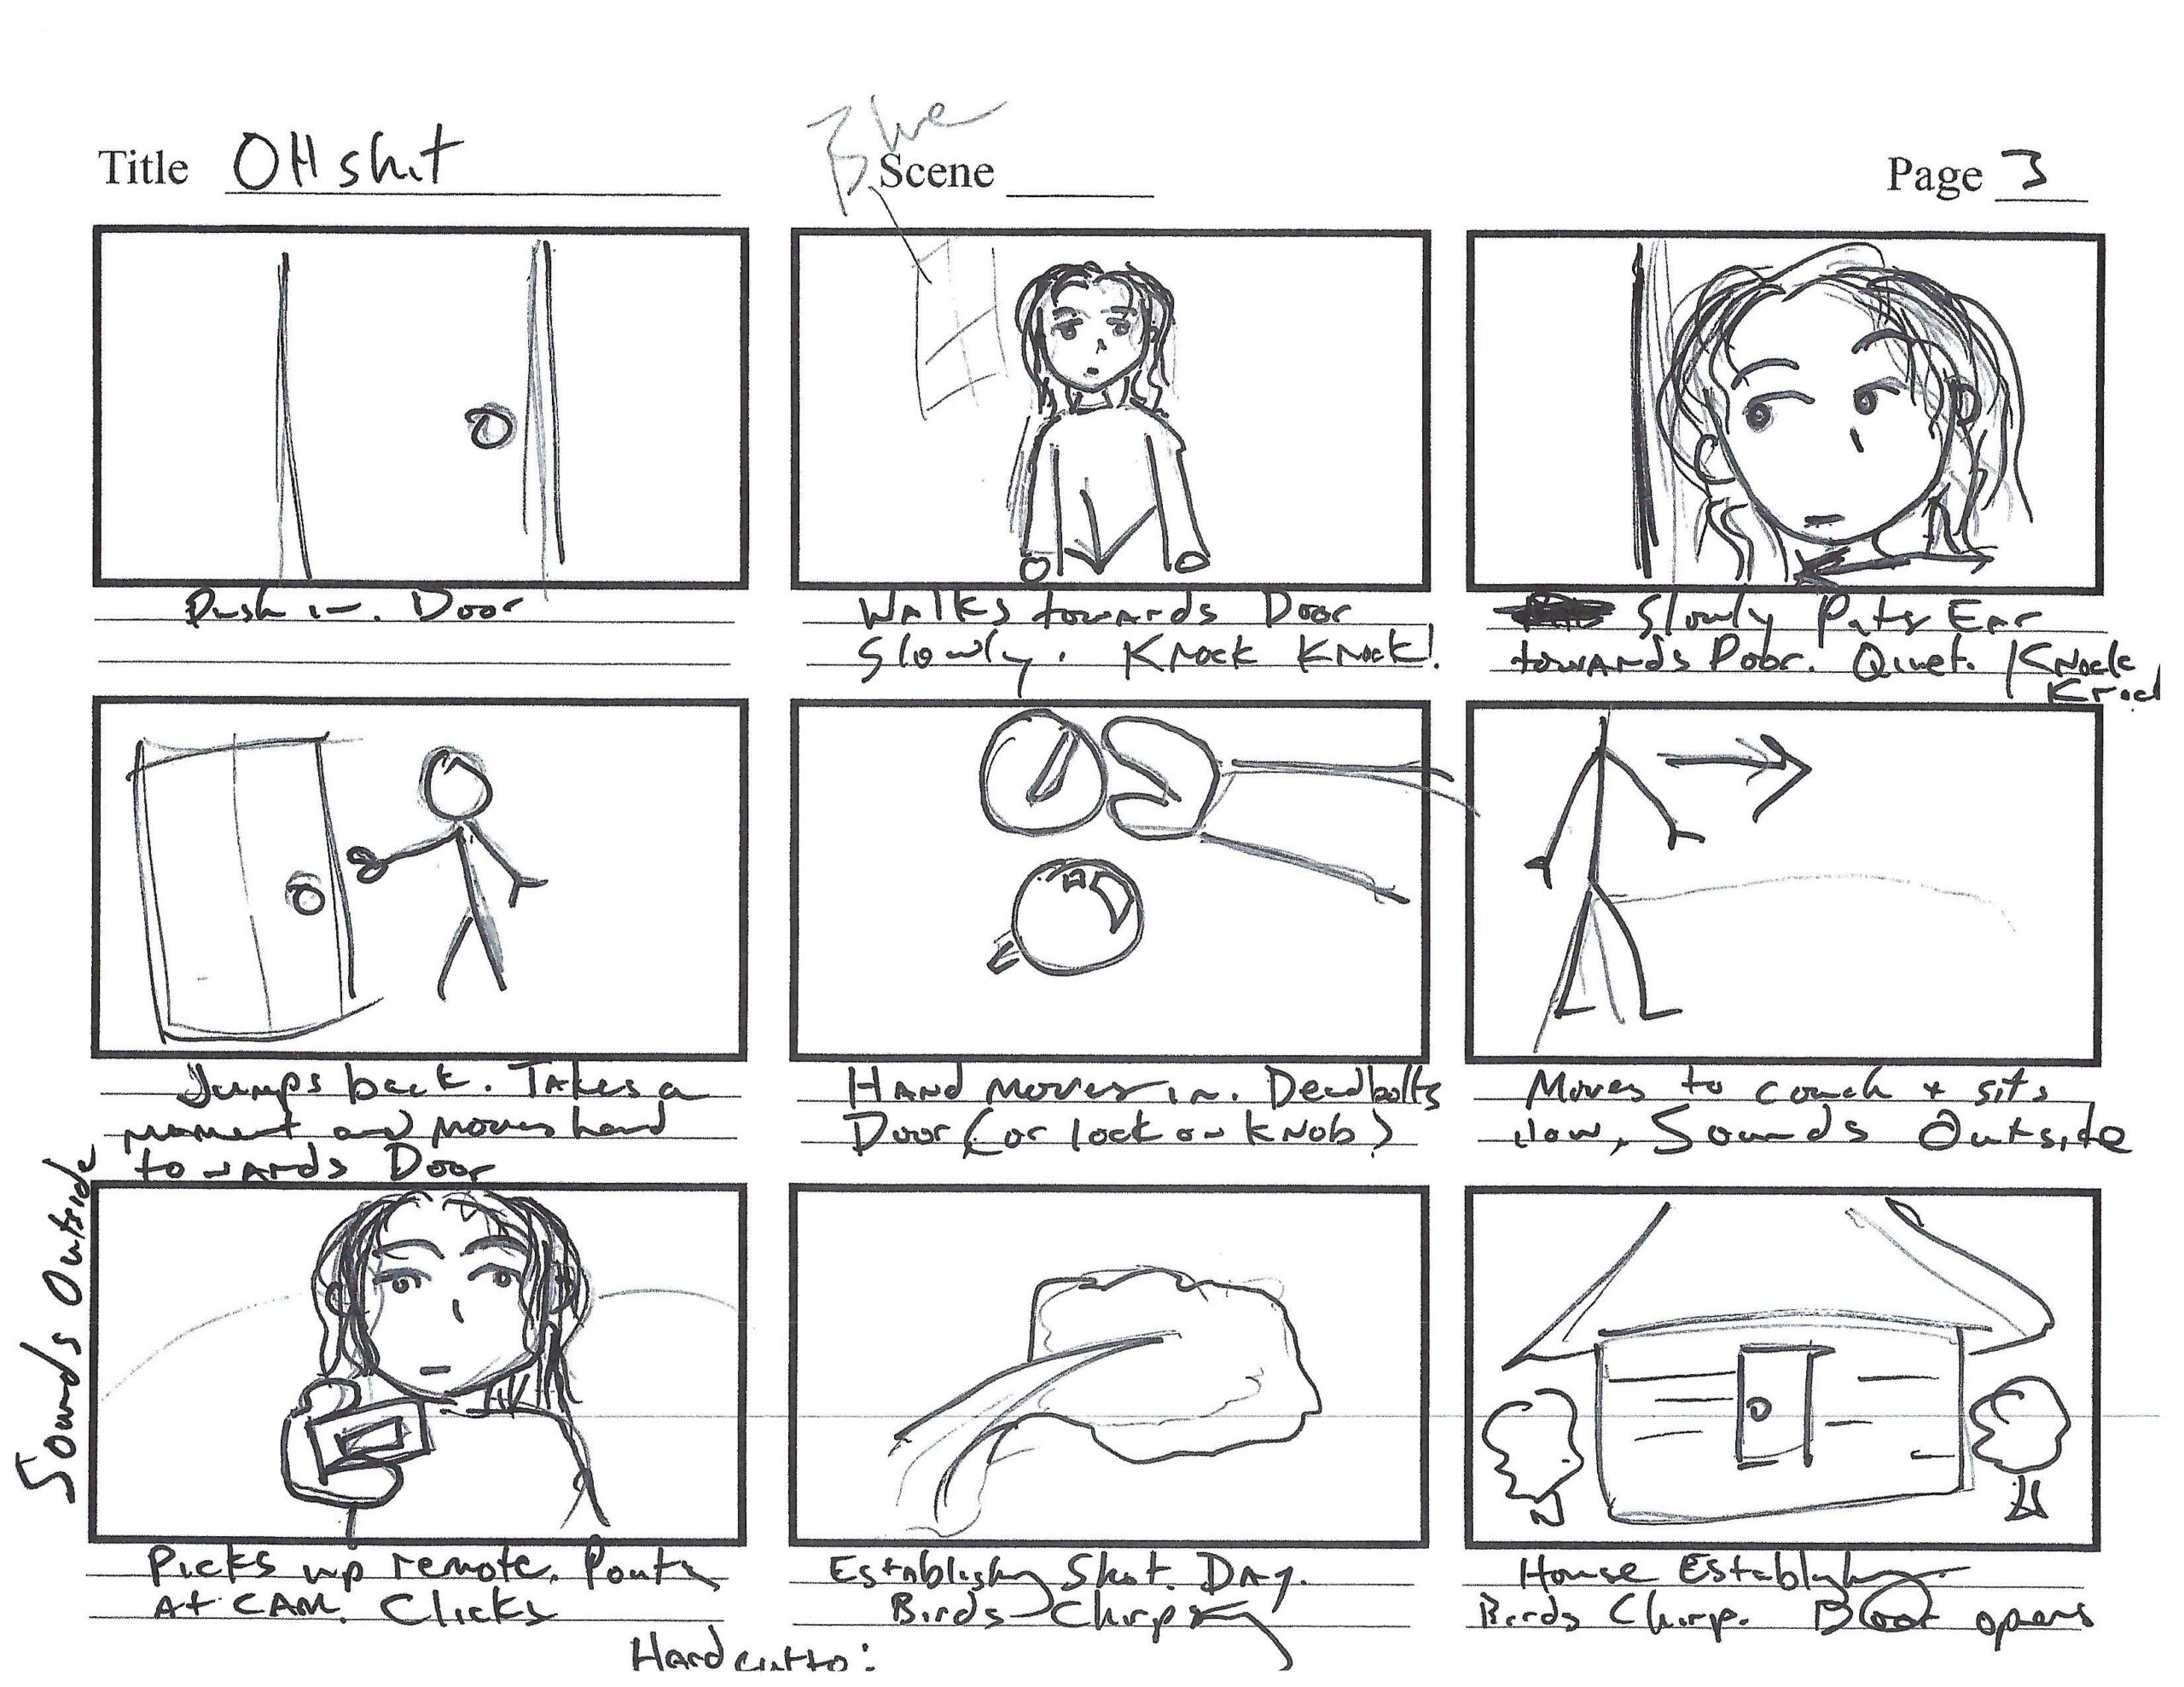 OhShitStoryboards_Page_3